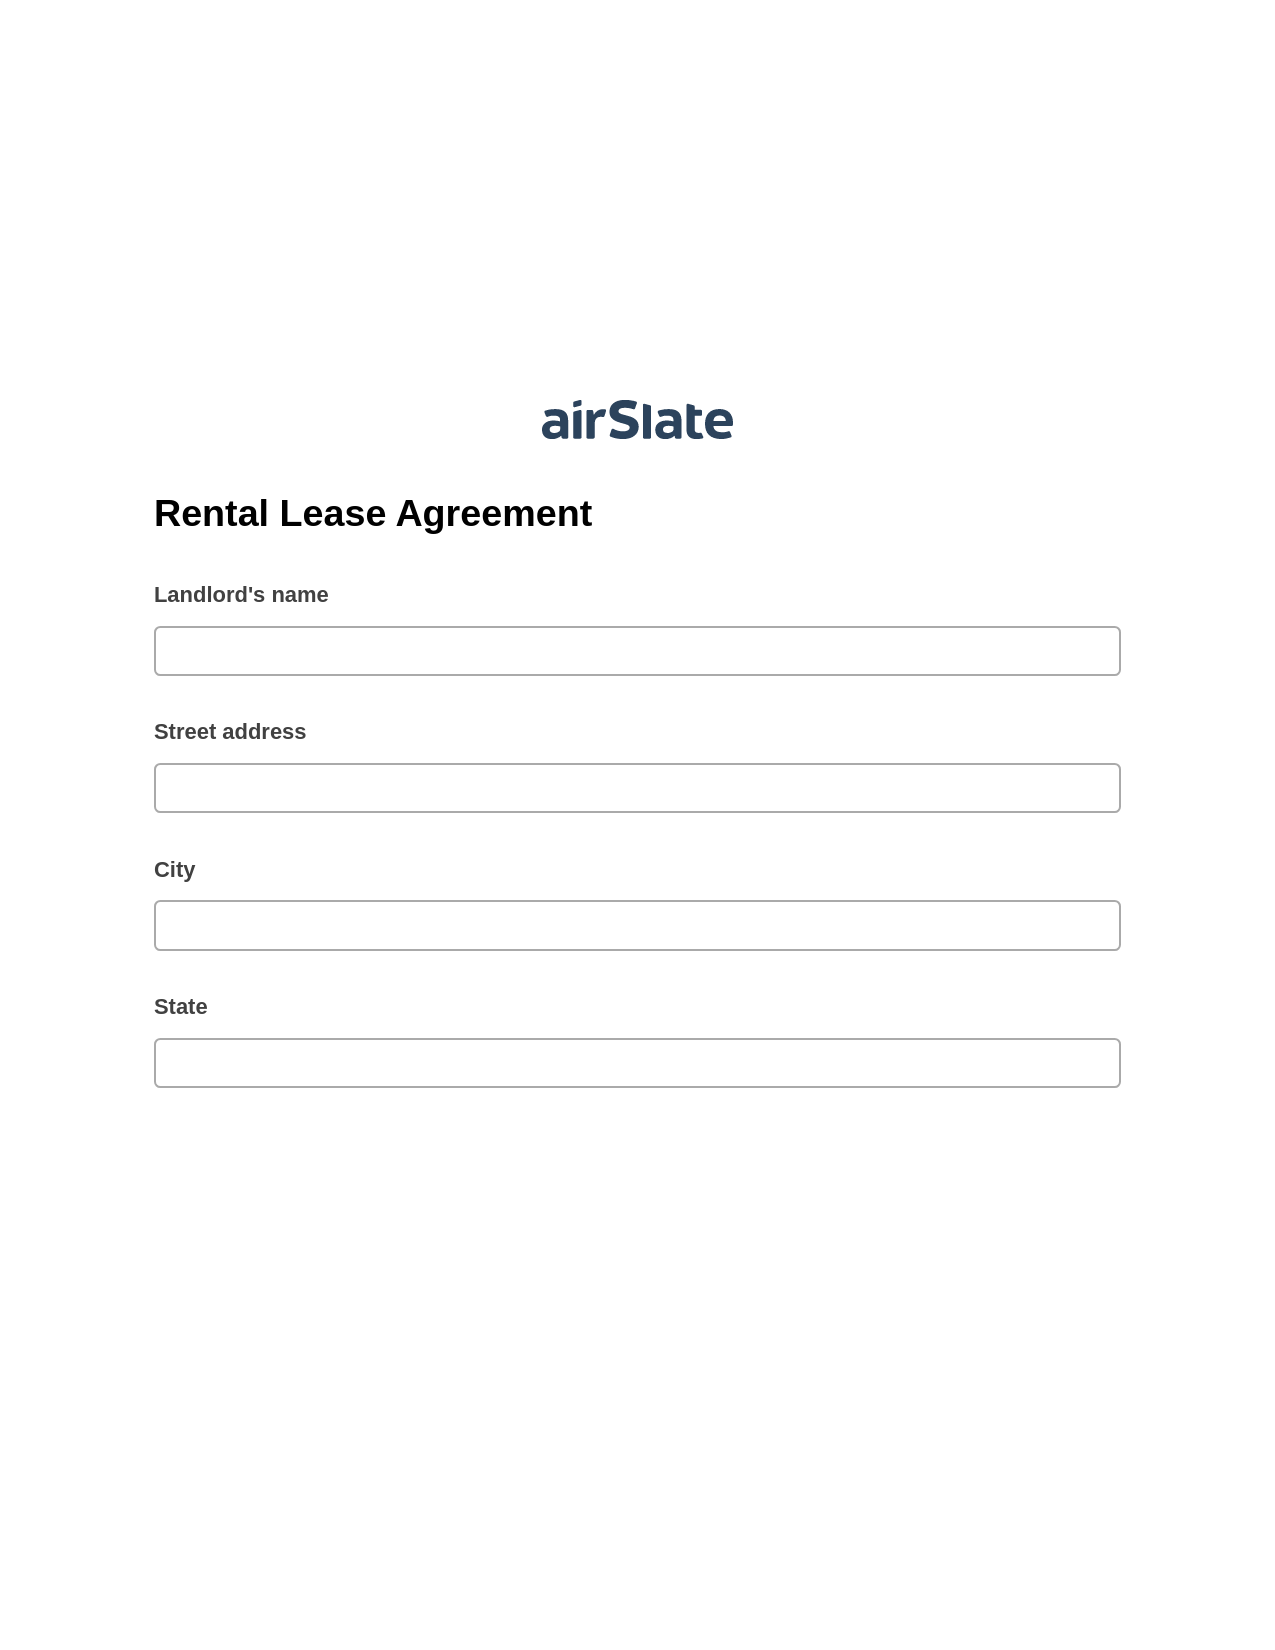 Rental Lease Agreement Pre-fill from Excel Spreadsheet Bot, Invoke Salesforce Process Bot, Post-finish Document Bot